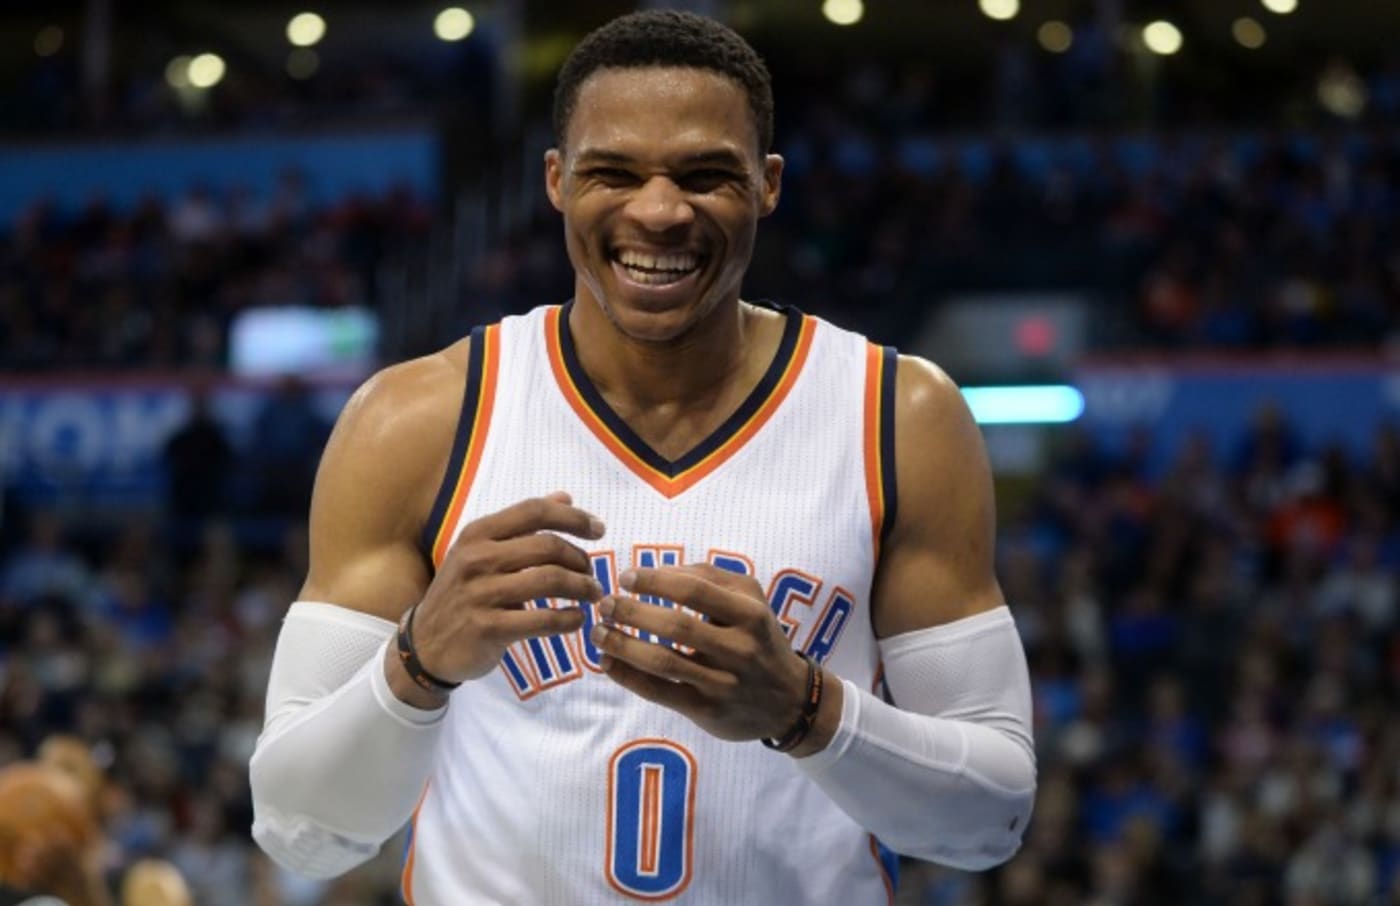 Russell Westbrook laughs during a game.